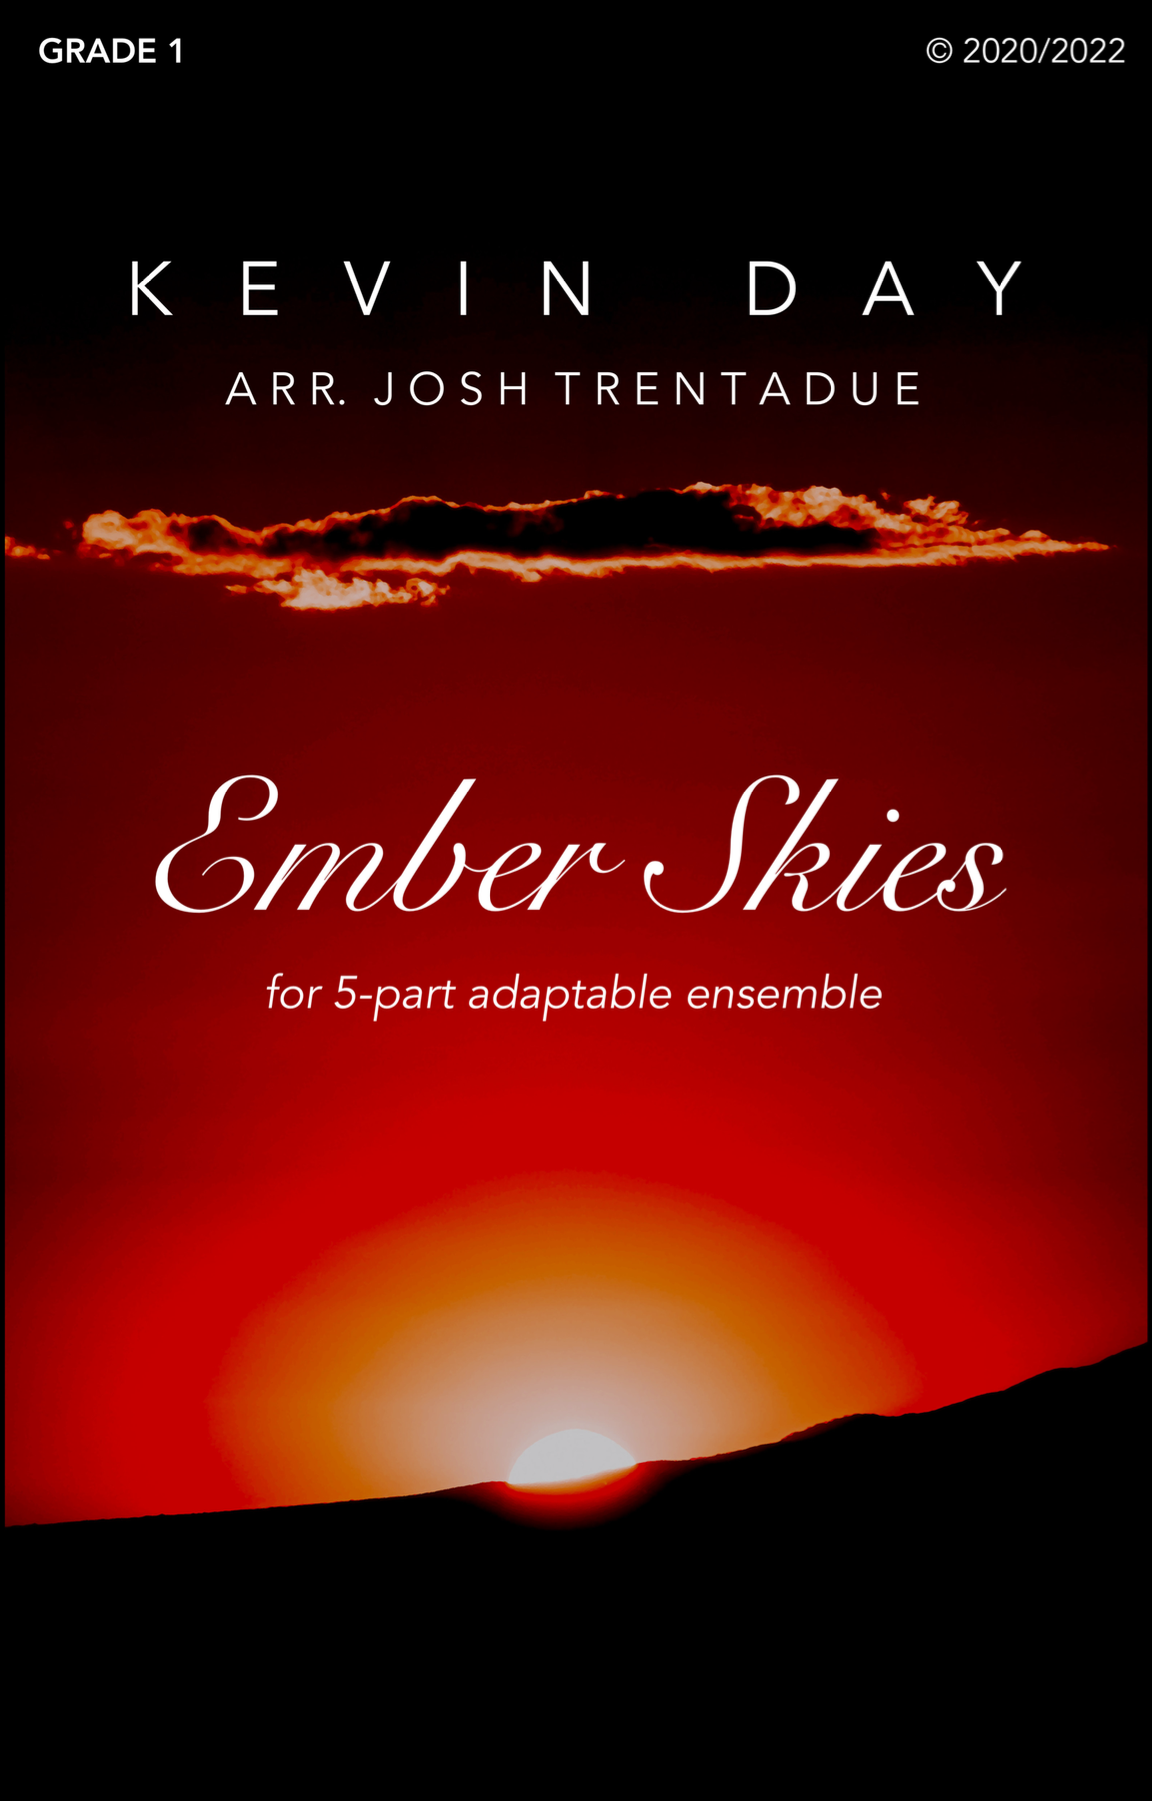 Ember Skies, Flex Version by Kevin Day, arr. Trentadue